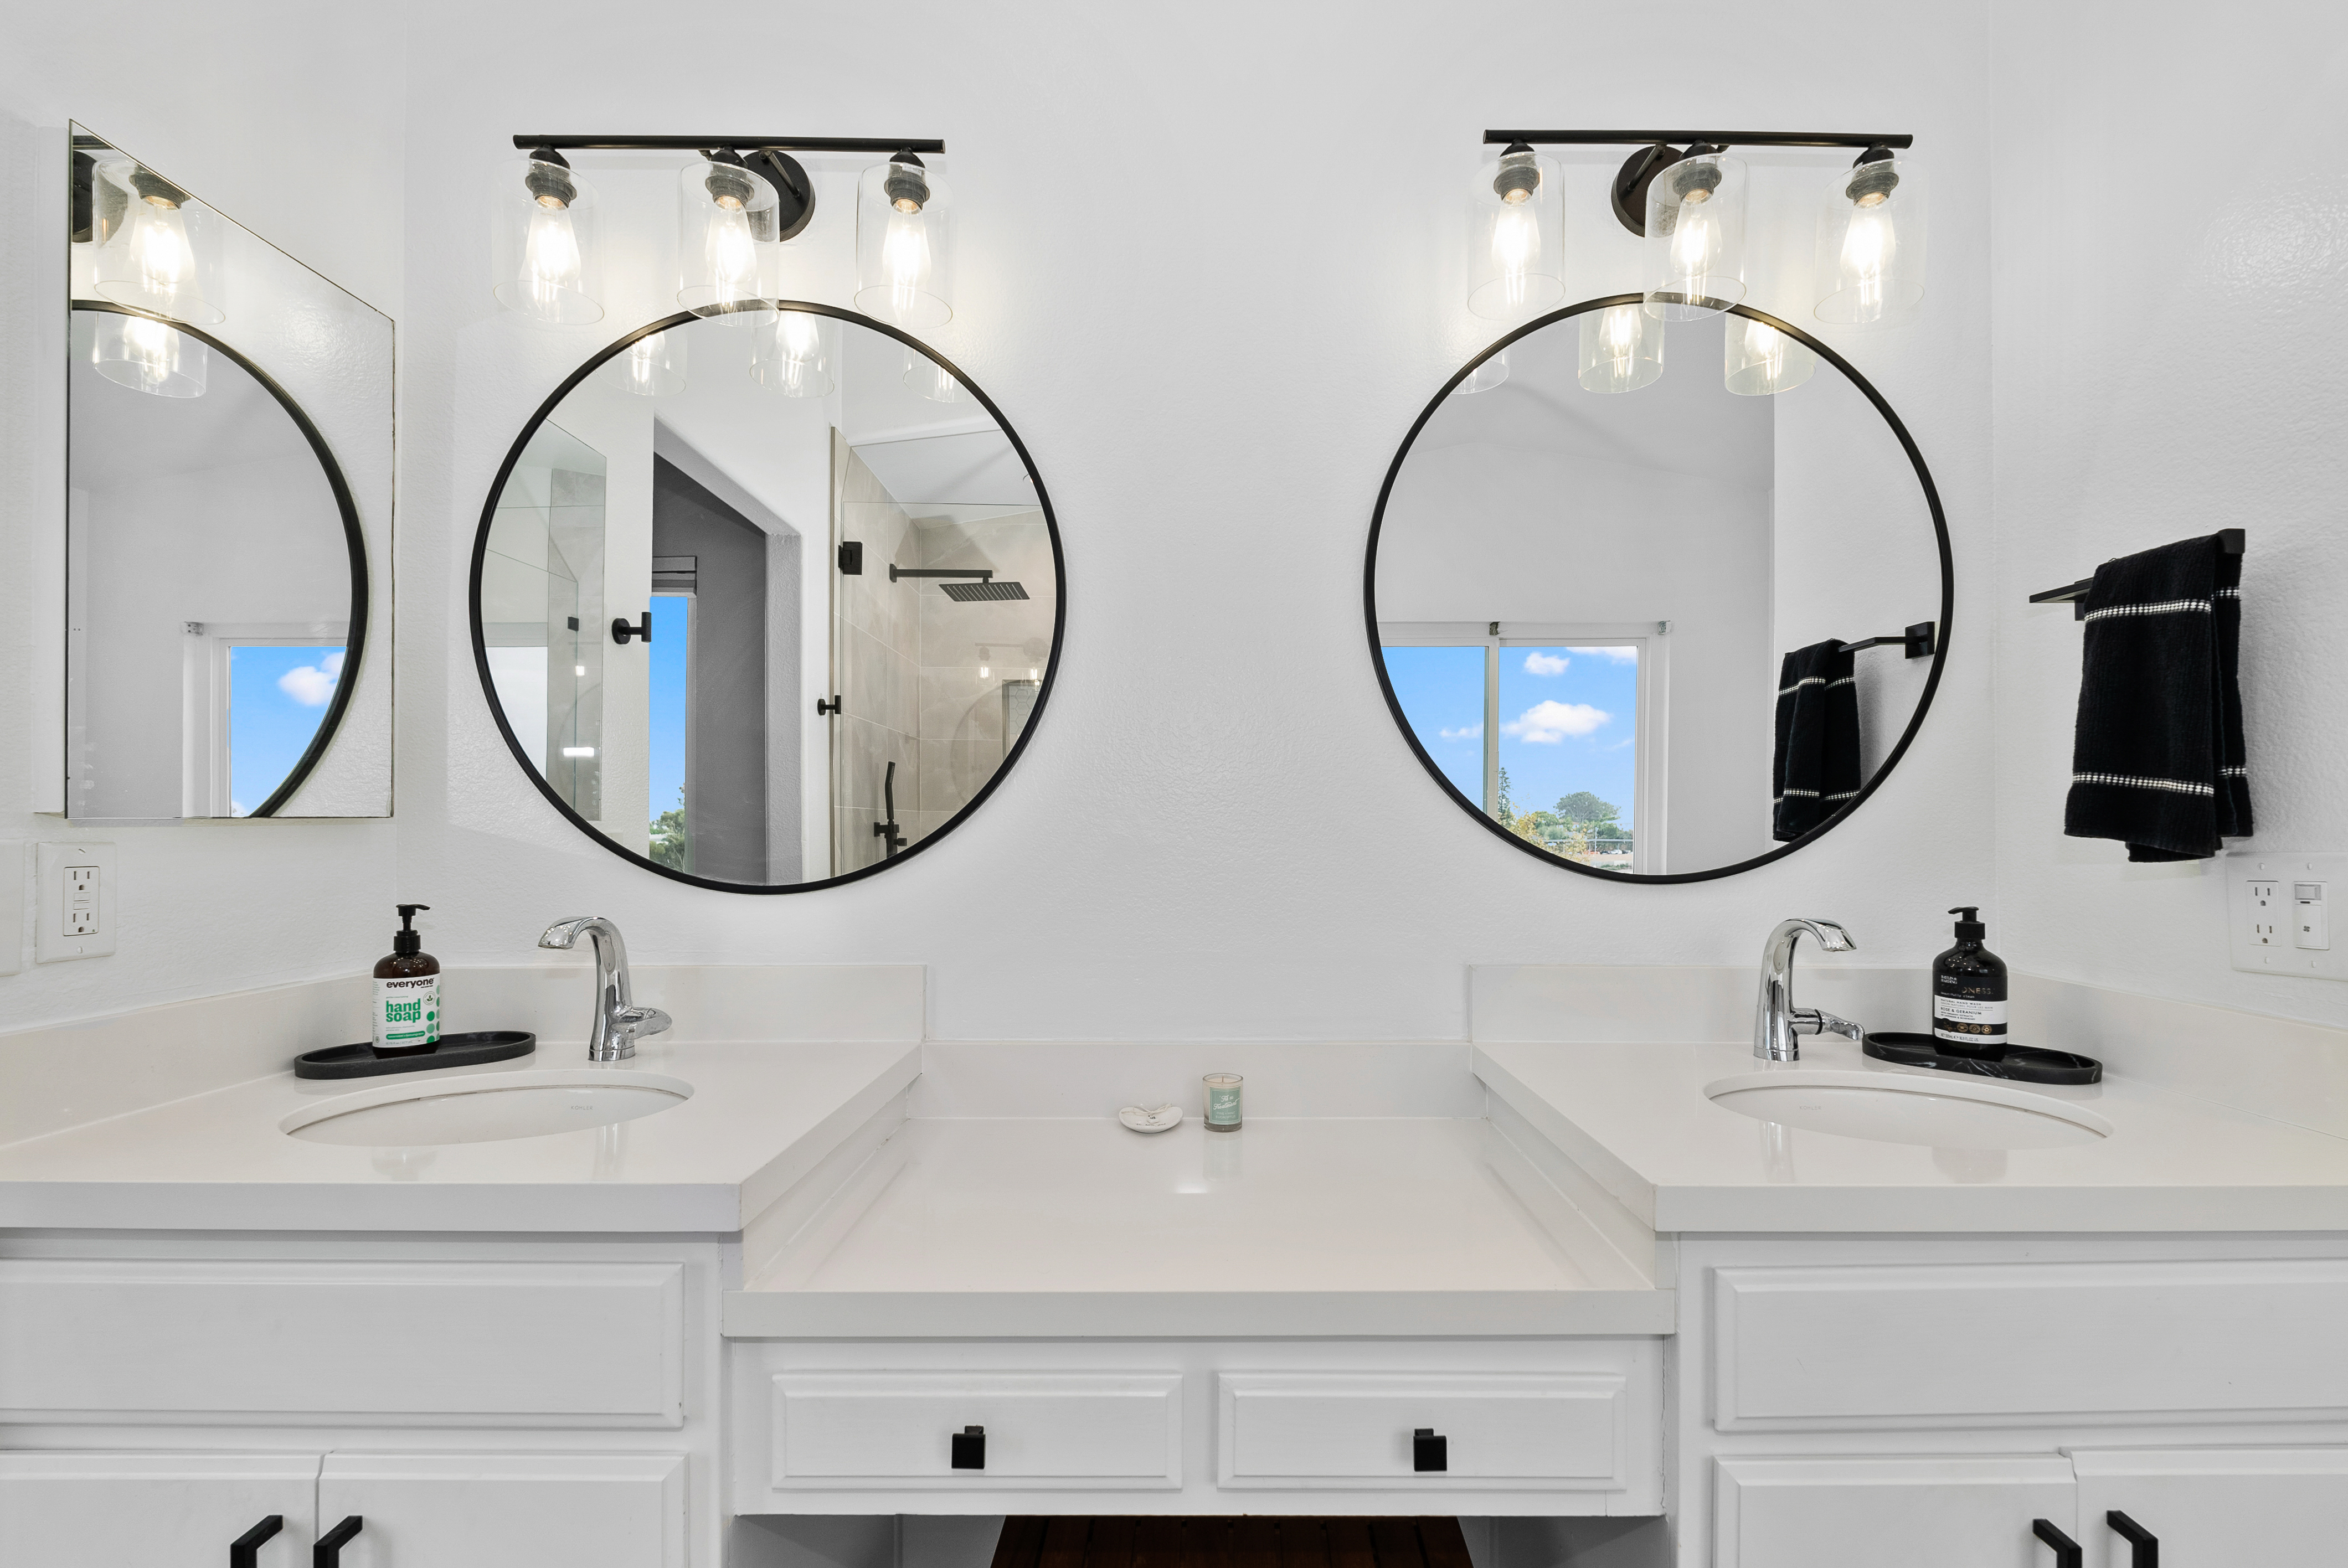 Double vanity setup with circular mirrors and white porcelain sinks